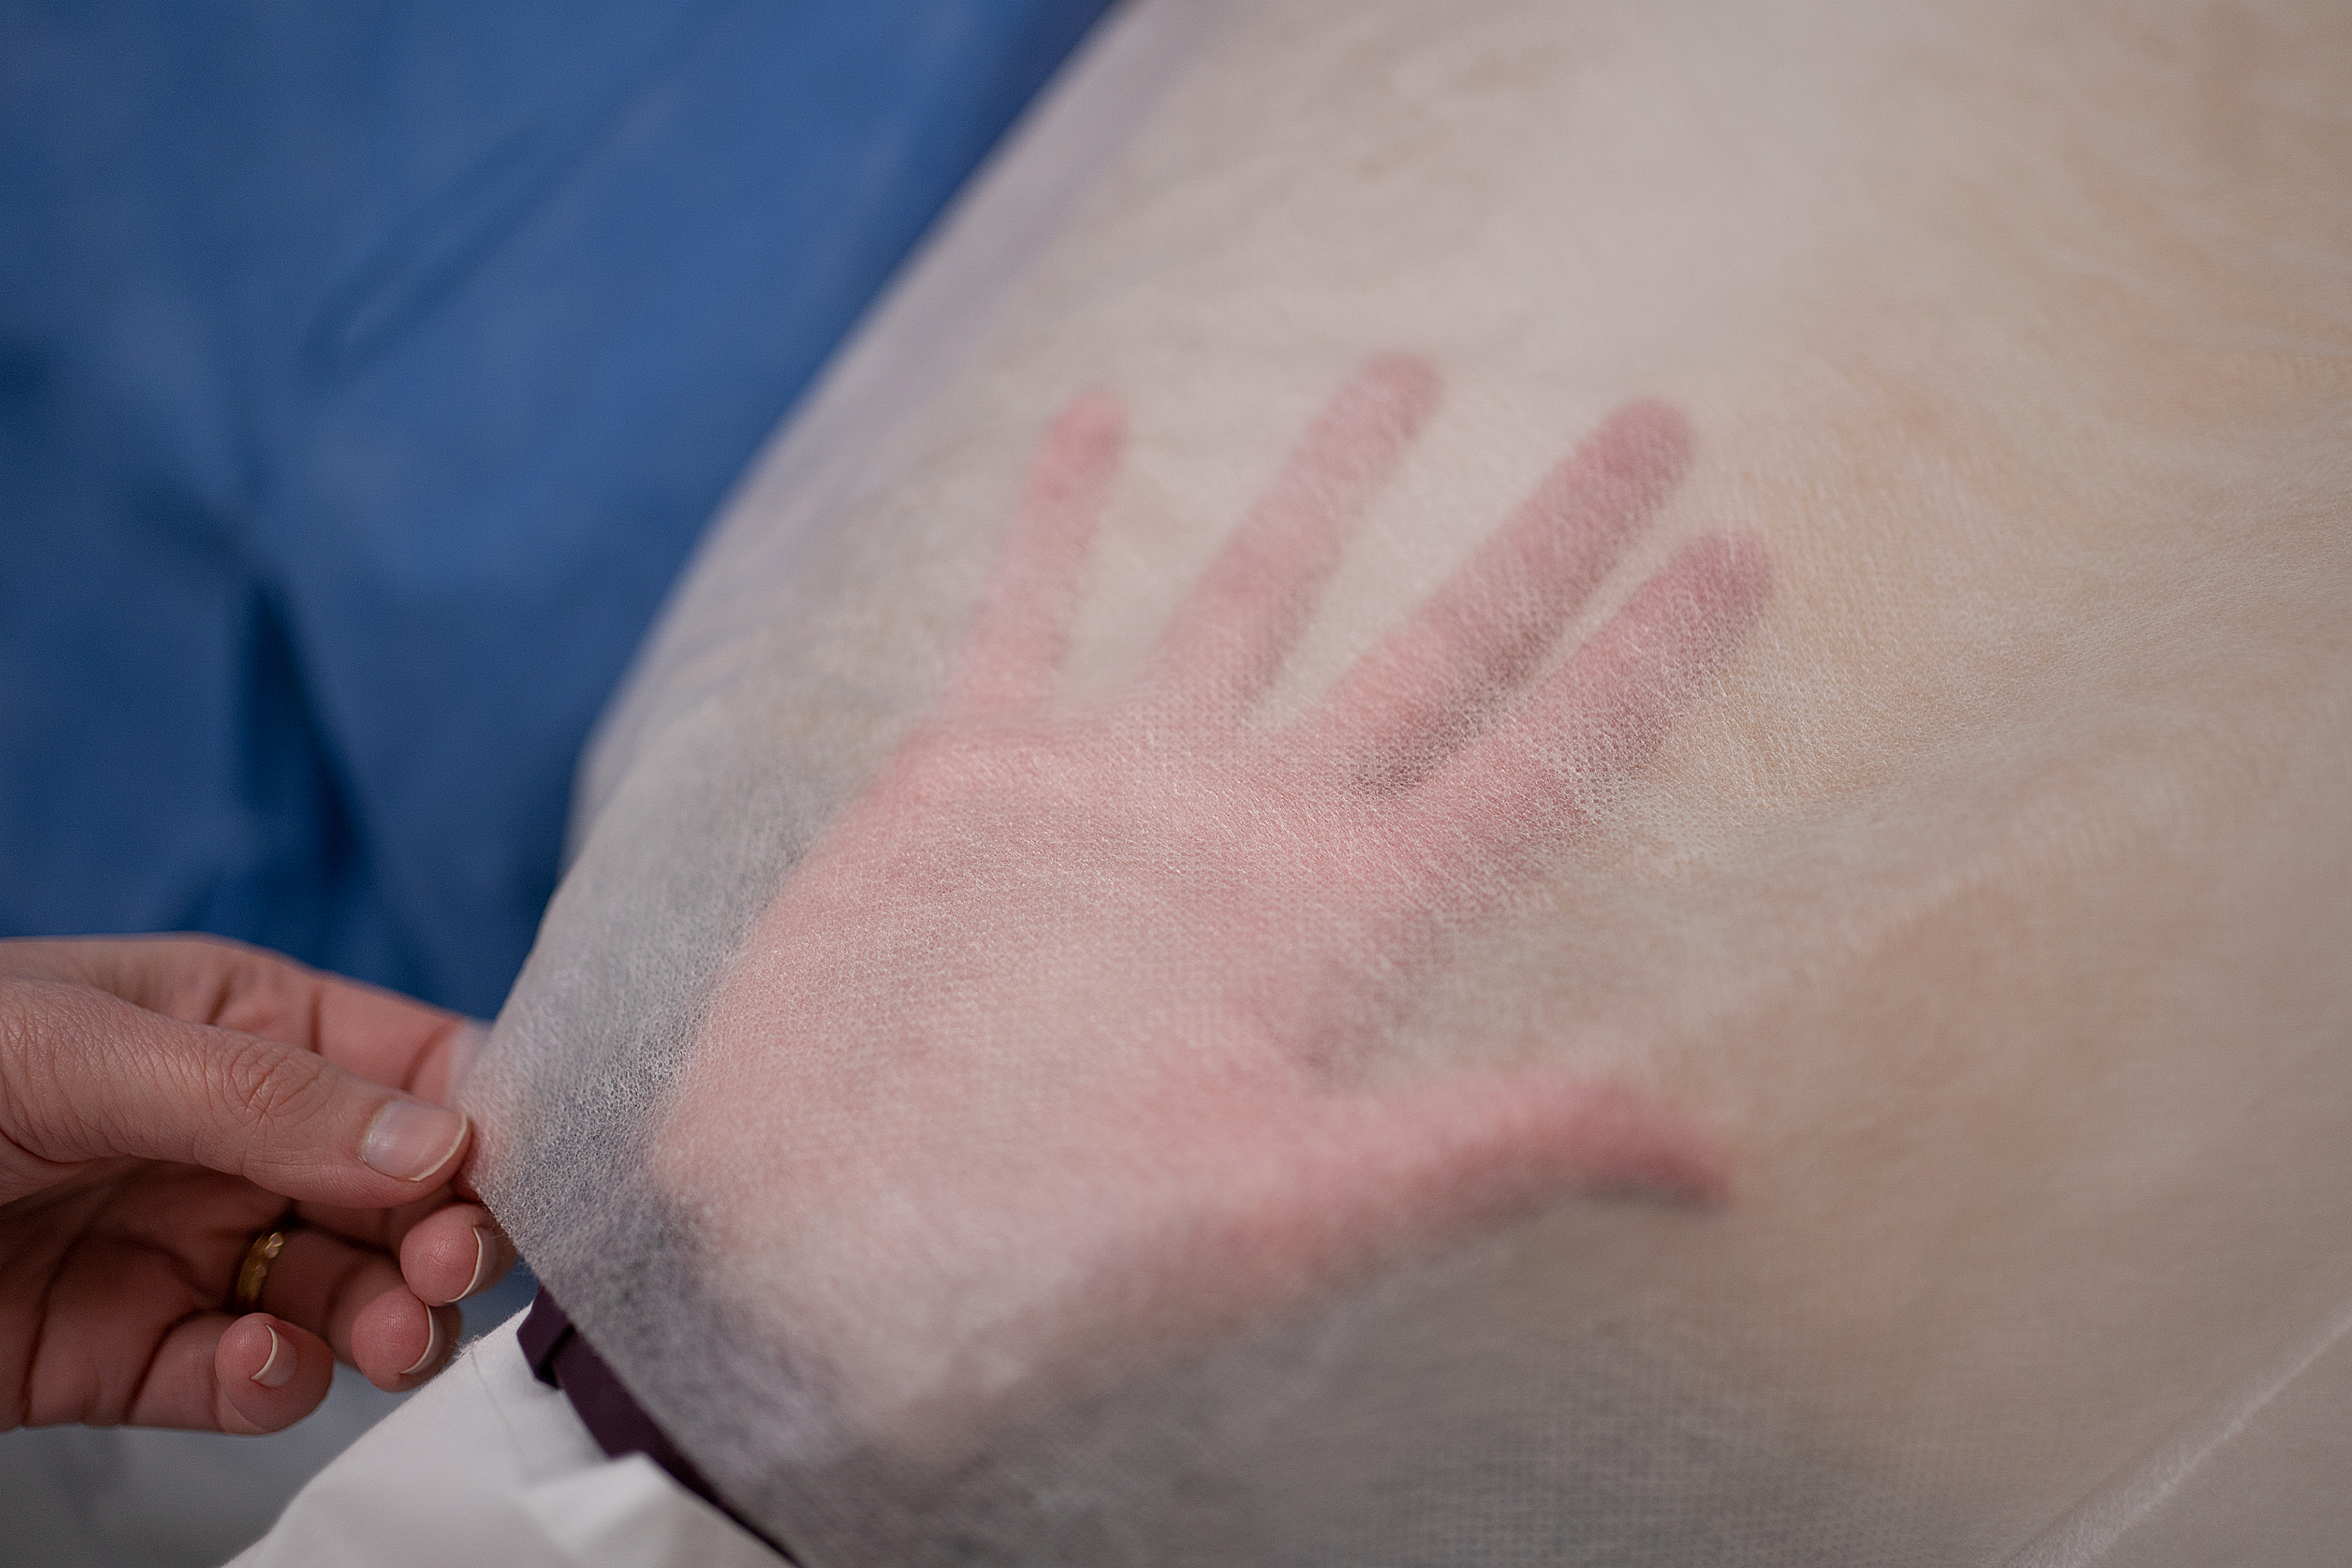 A close up photo shows Karen Haberland's hand visible under the shear fabric of a medical isolation gown.